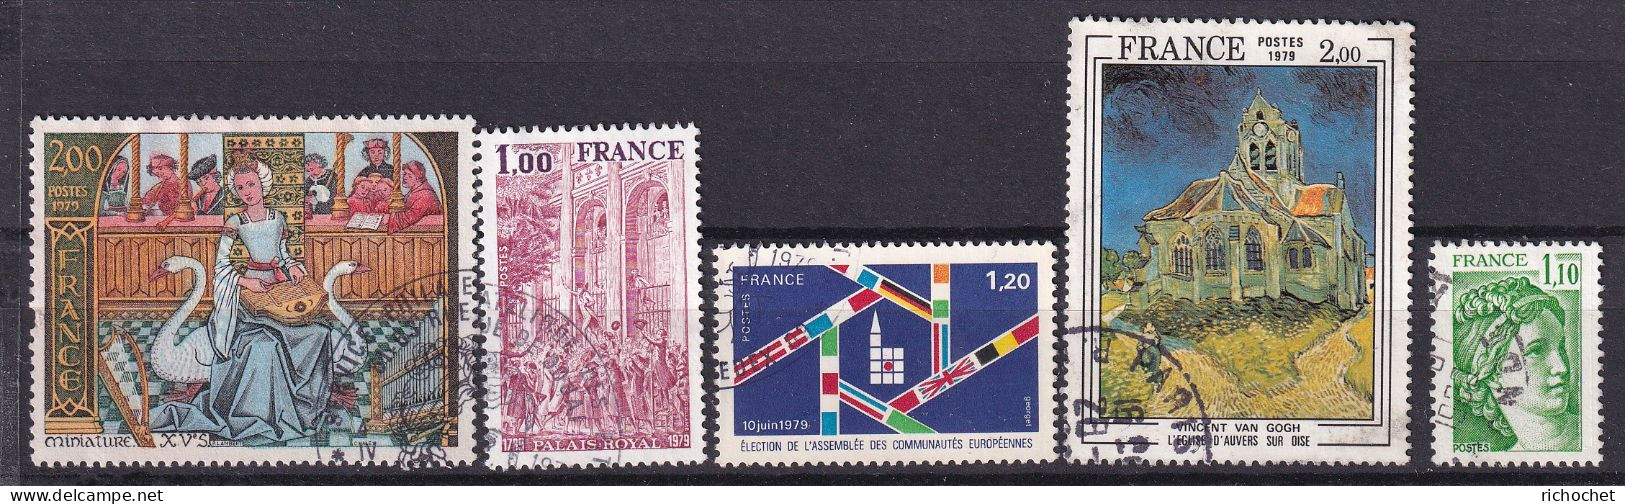 France   2033 + 2049 + 2050 + 2057 + 2062  ° - Used Stamps